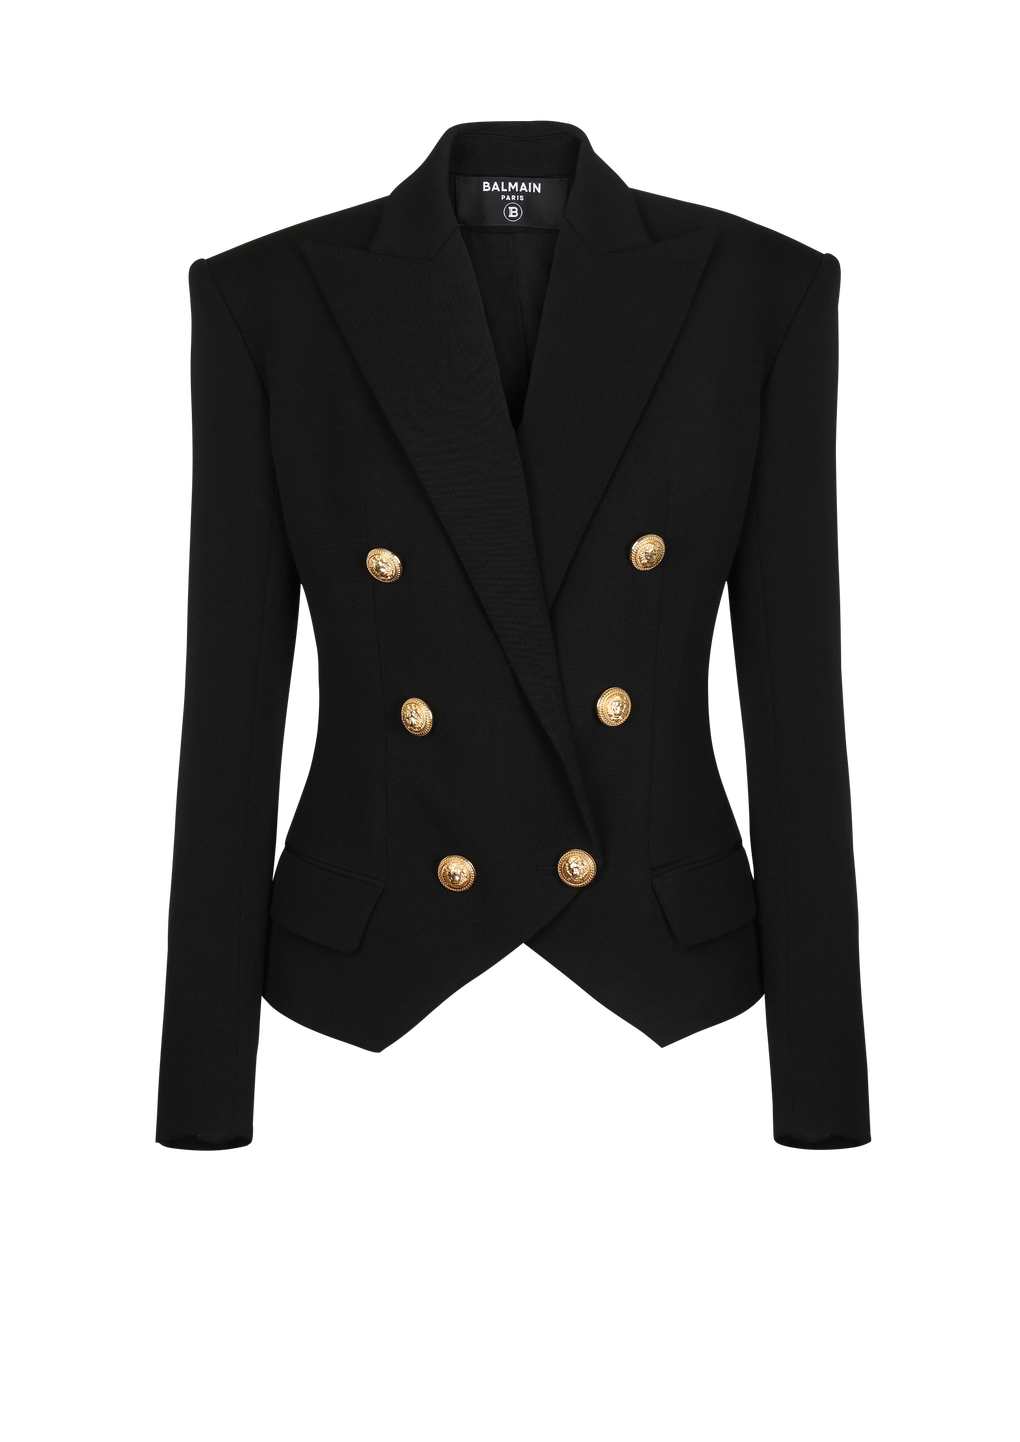 Wool double-breasted blazer, black, hi-res